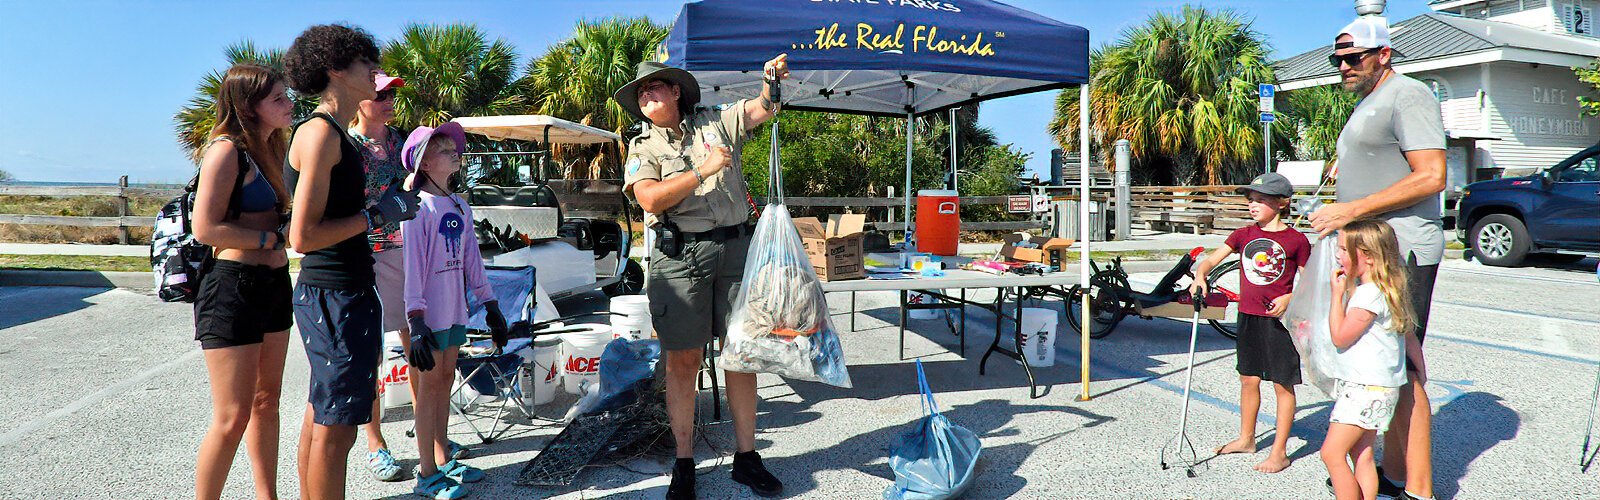 Coordinated by park services specialist Beth Reynolds, the International Coastal Cleanup inspired 57 volunteers to show up on September 16th and remove a total of 156 pounds of trash from the beaches of Honeymoon Island in less than three hours.